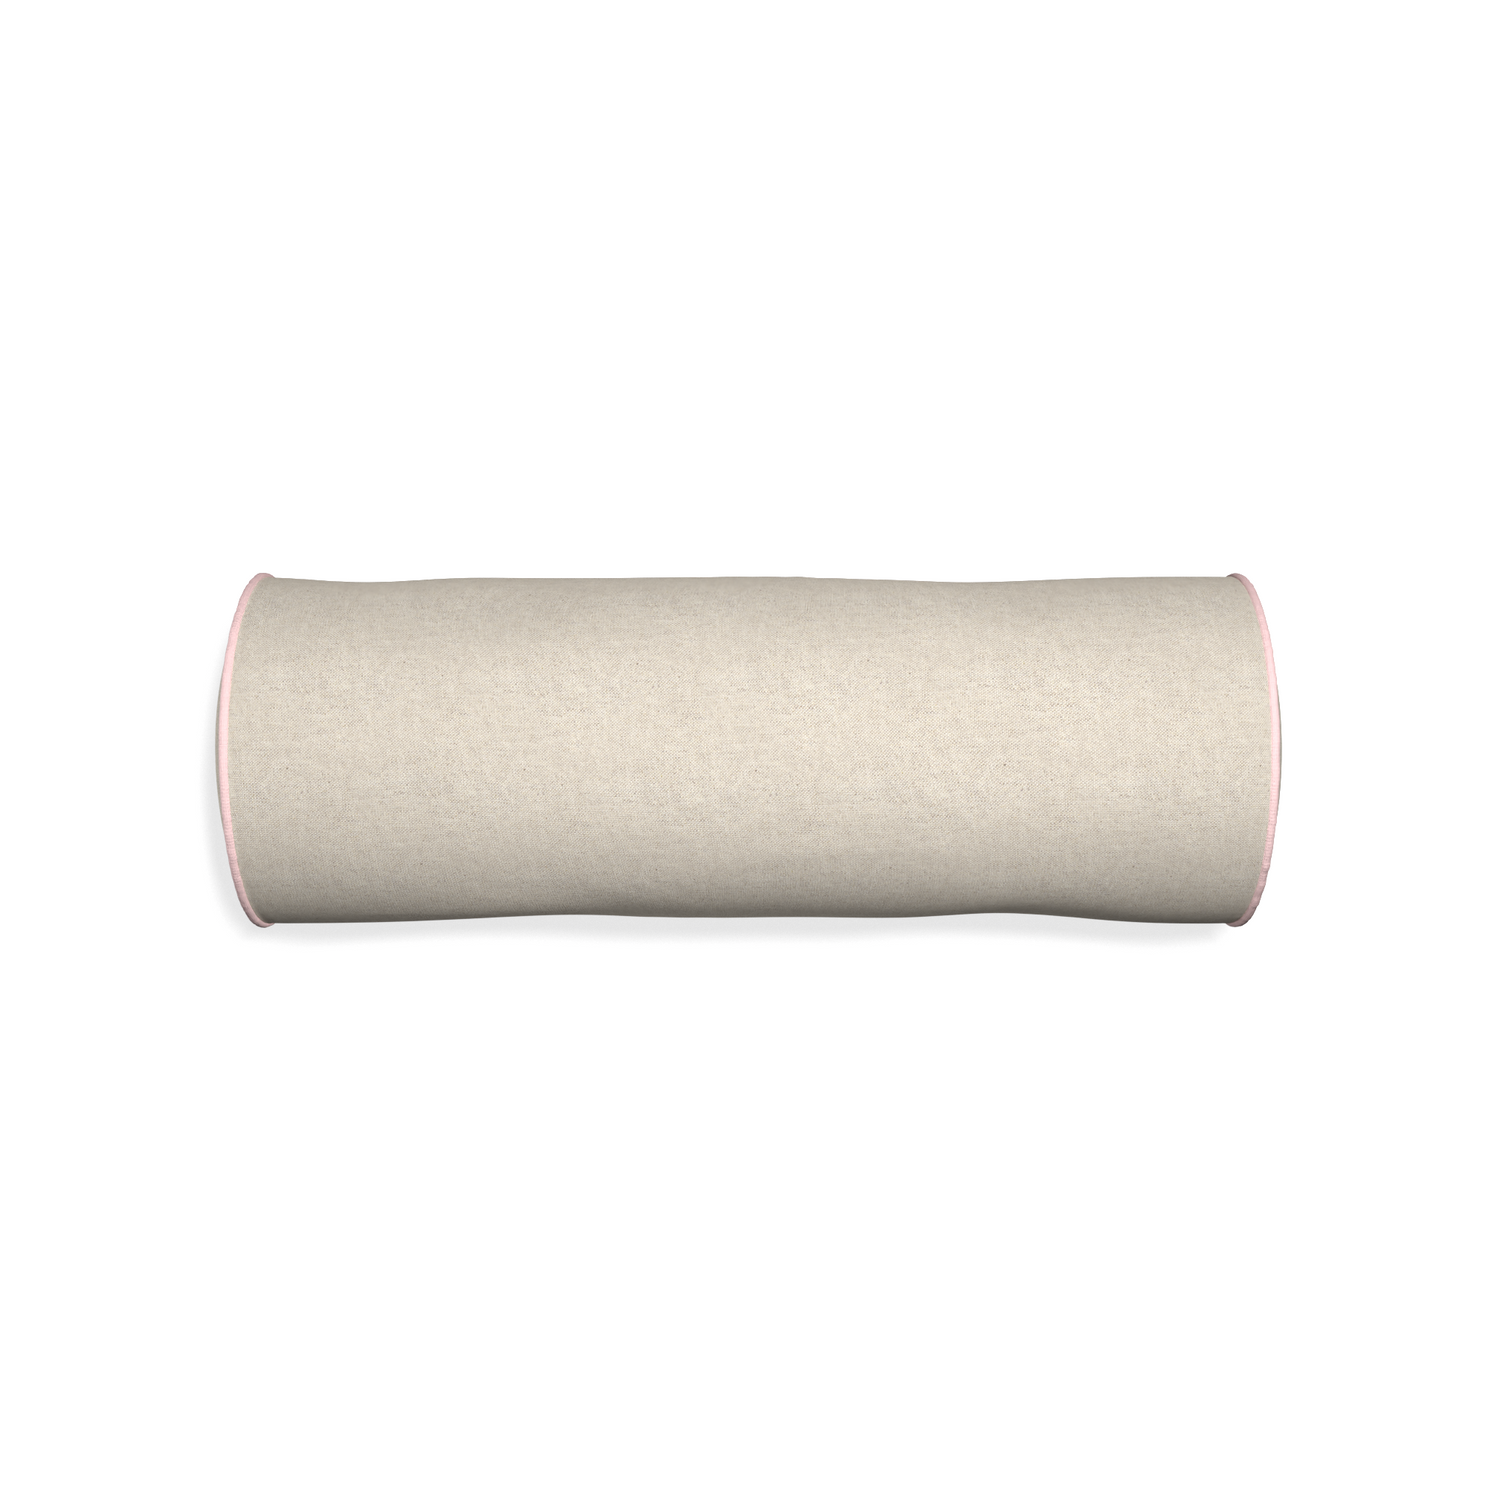 Bolster oat custom light brownpillow with petal piping on white background